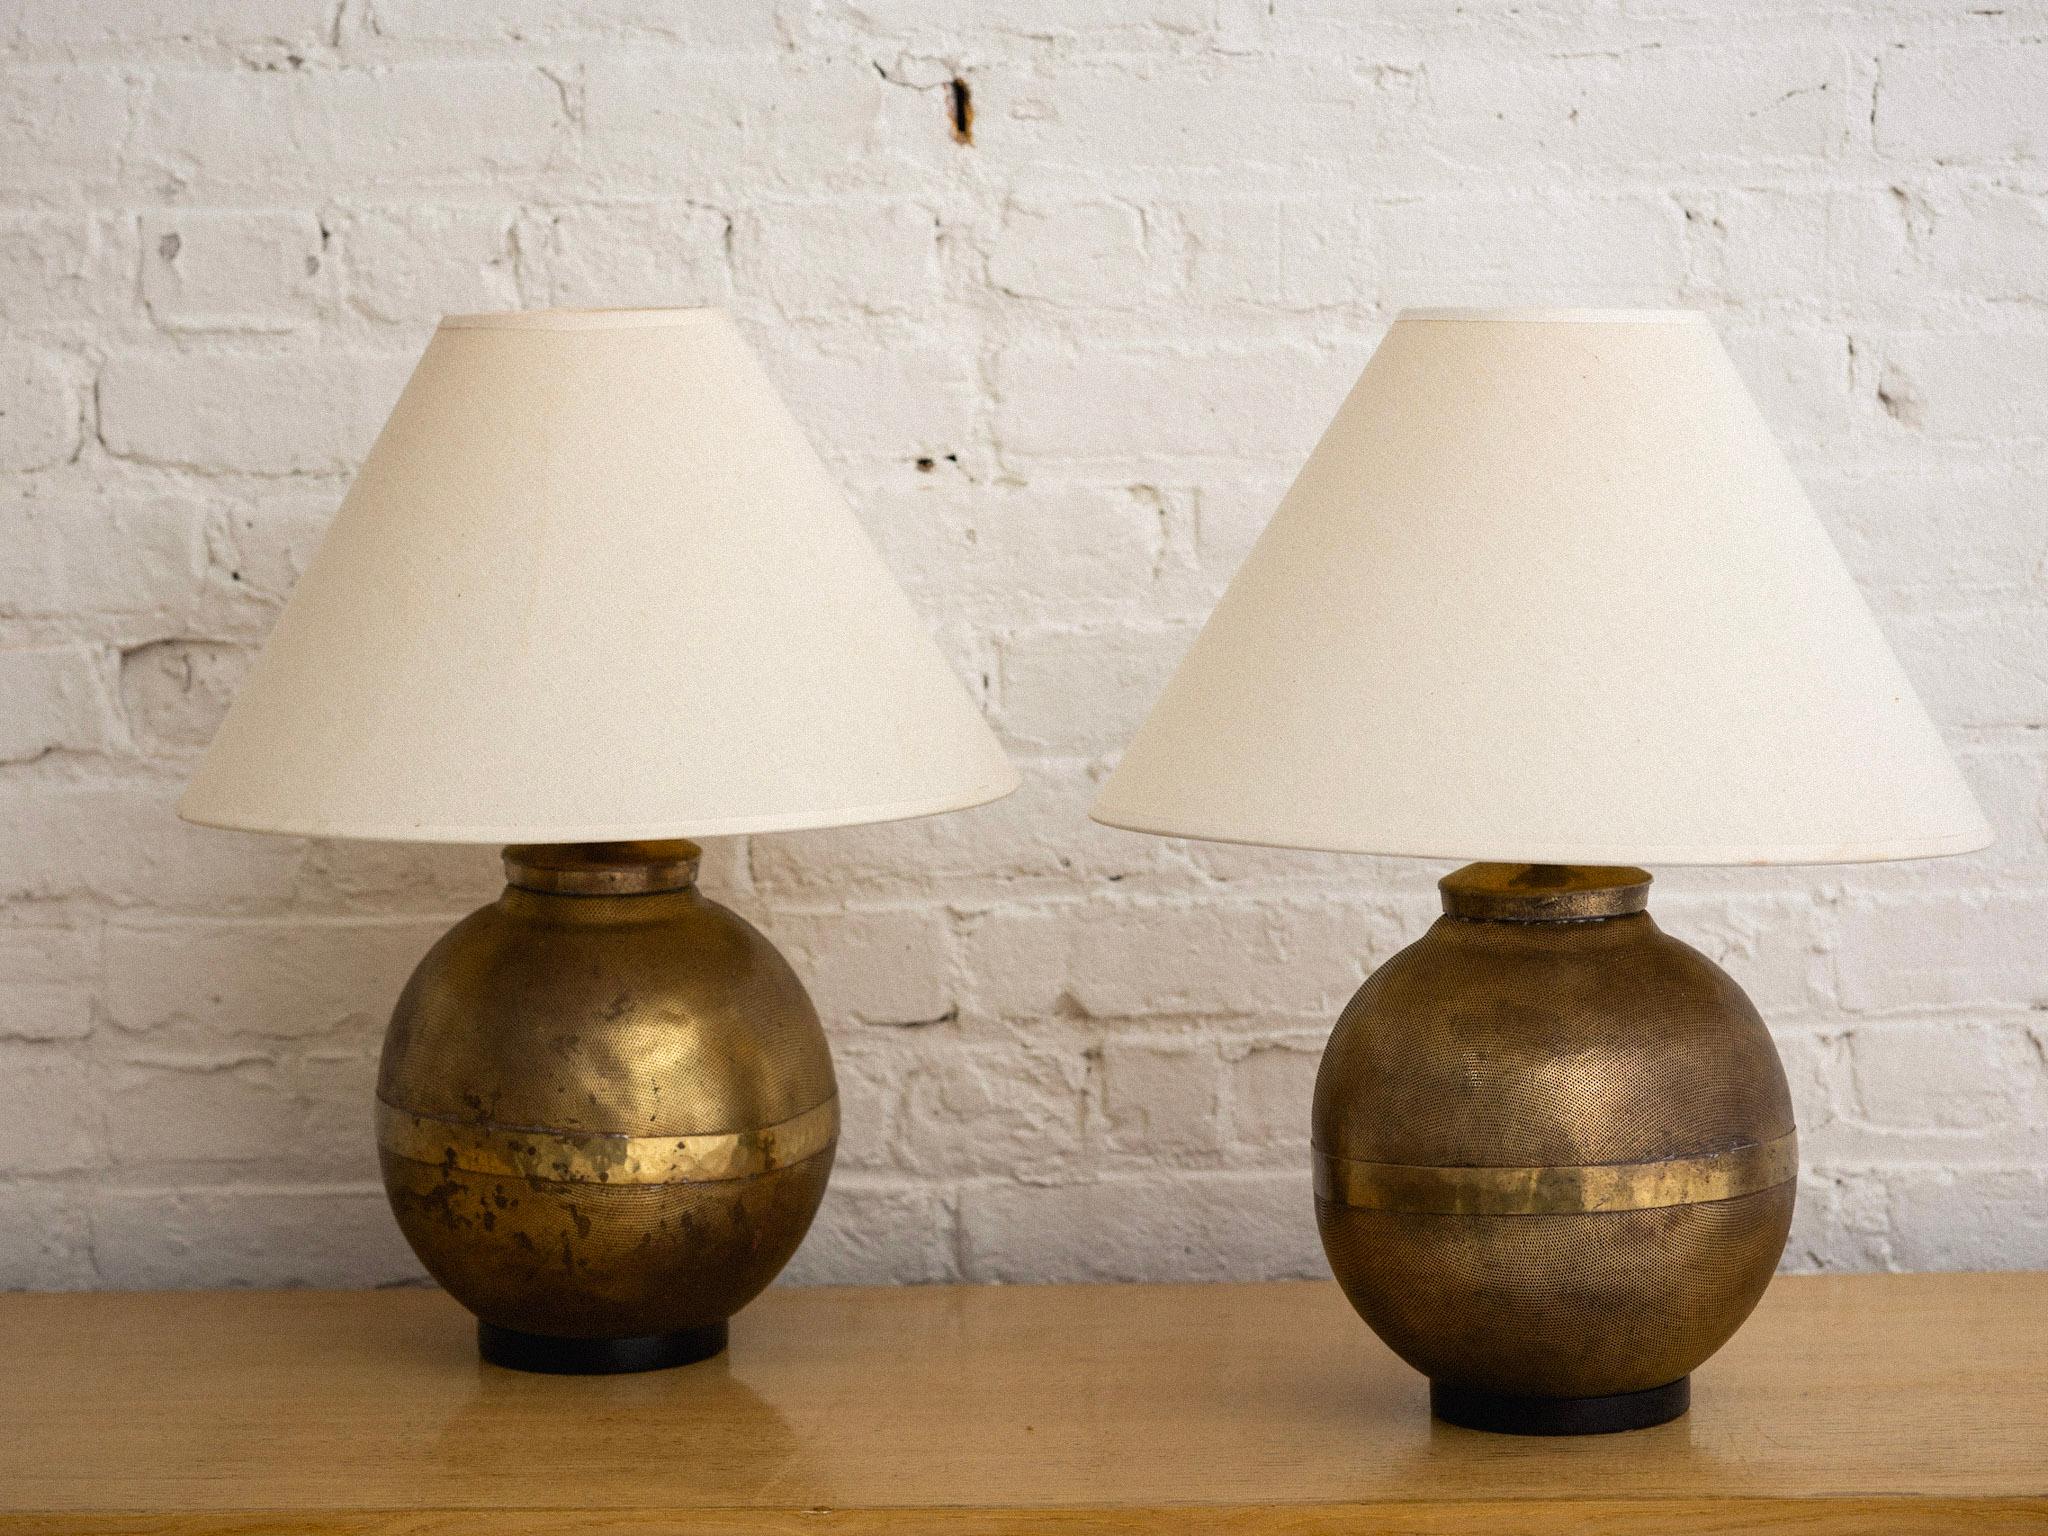 A pair of perforated brass globe lamps on painted wood bases. Heavy patina has developed with age. Harps included. Lamp shades not included. Harps add an additional 6 inches to listed height.